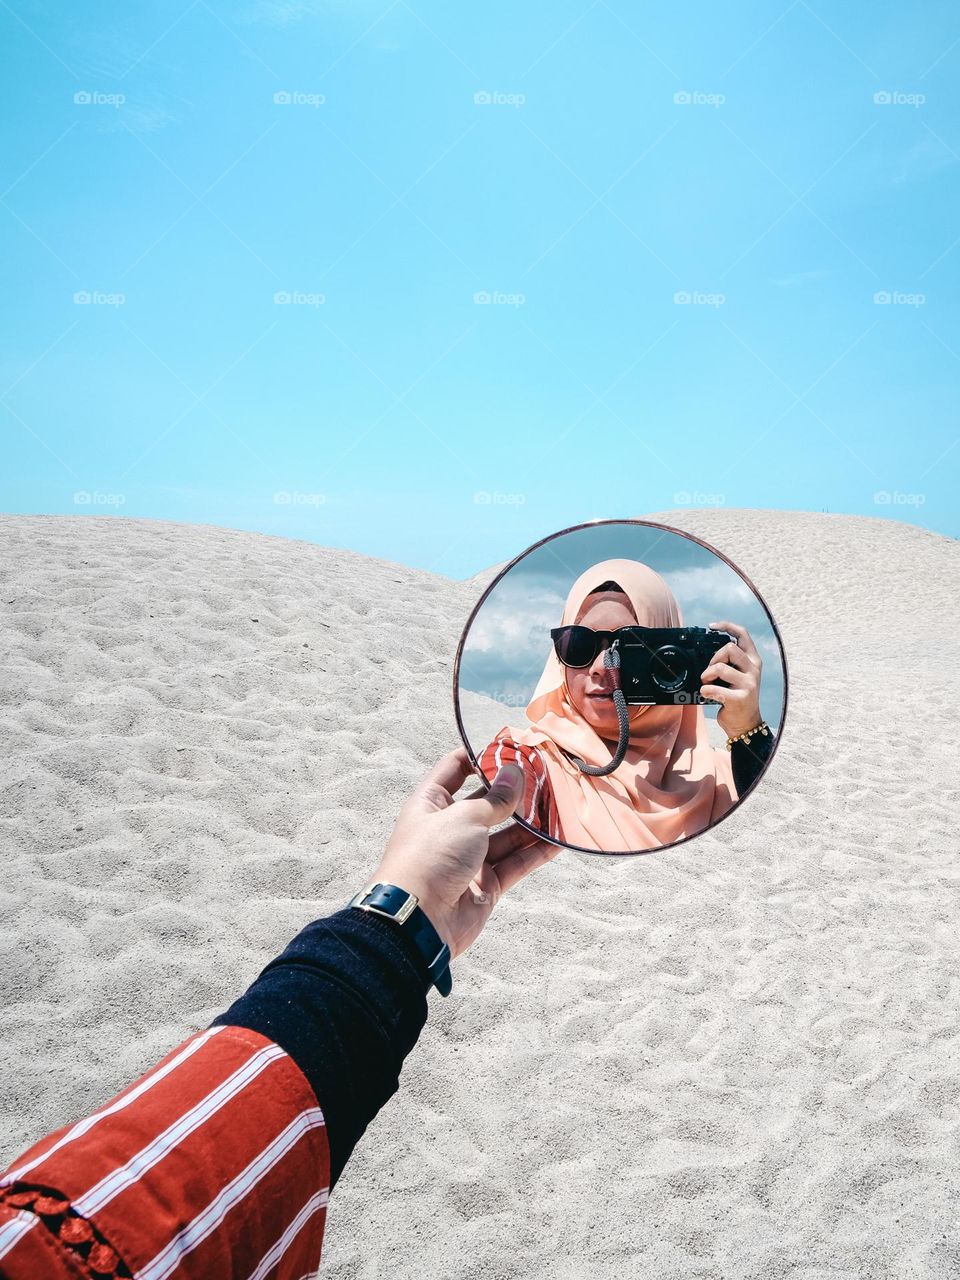 A woman taking a selfie with a mirror with sand dunes background